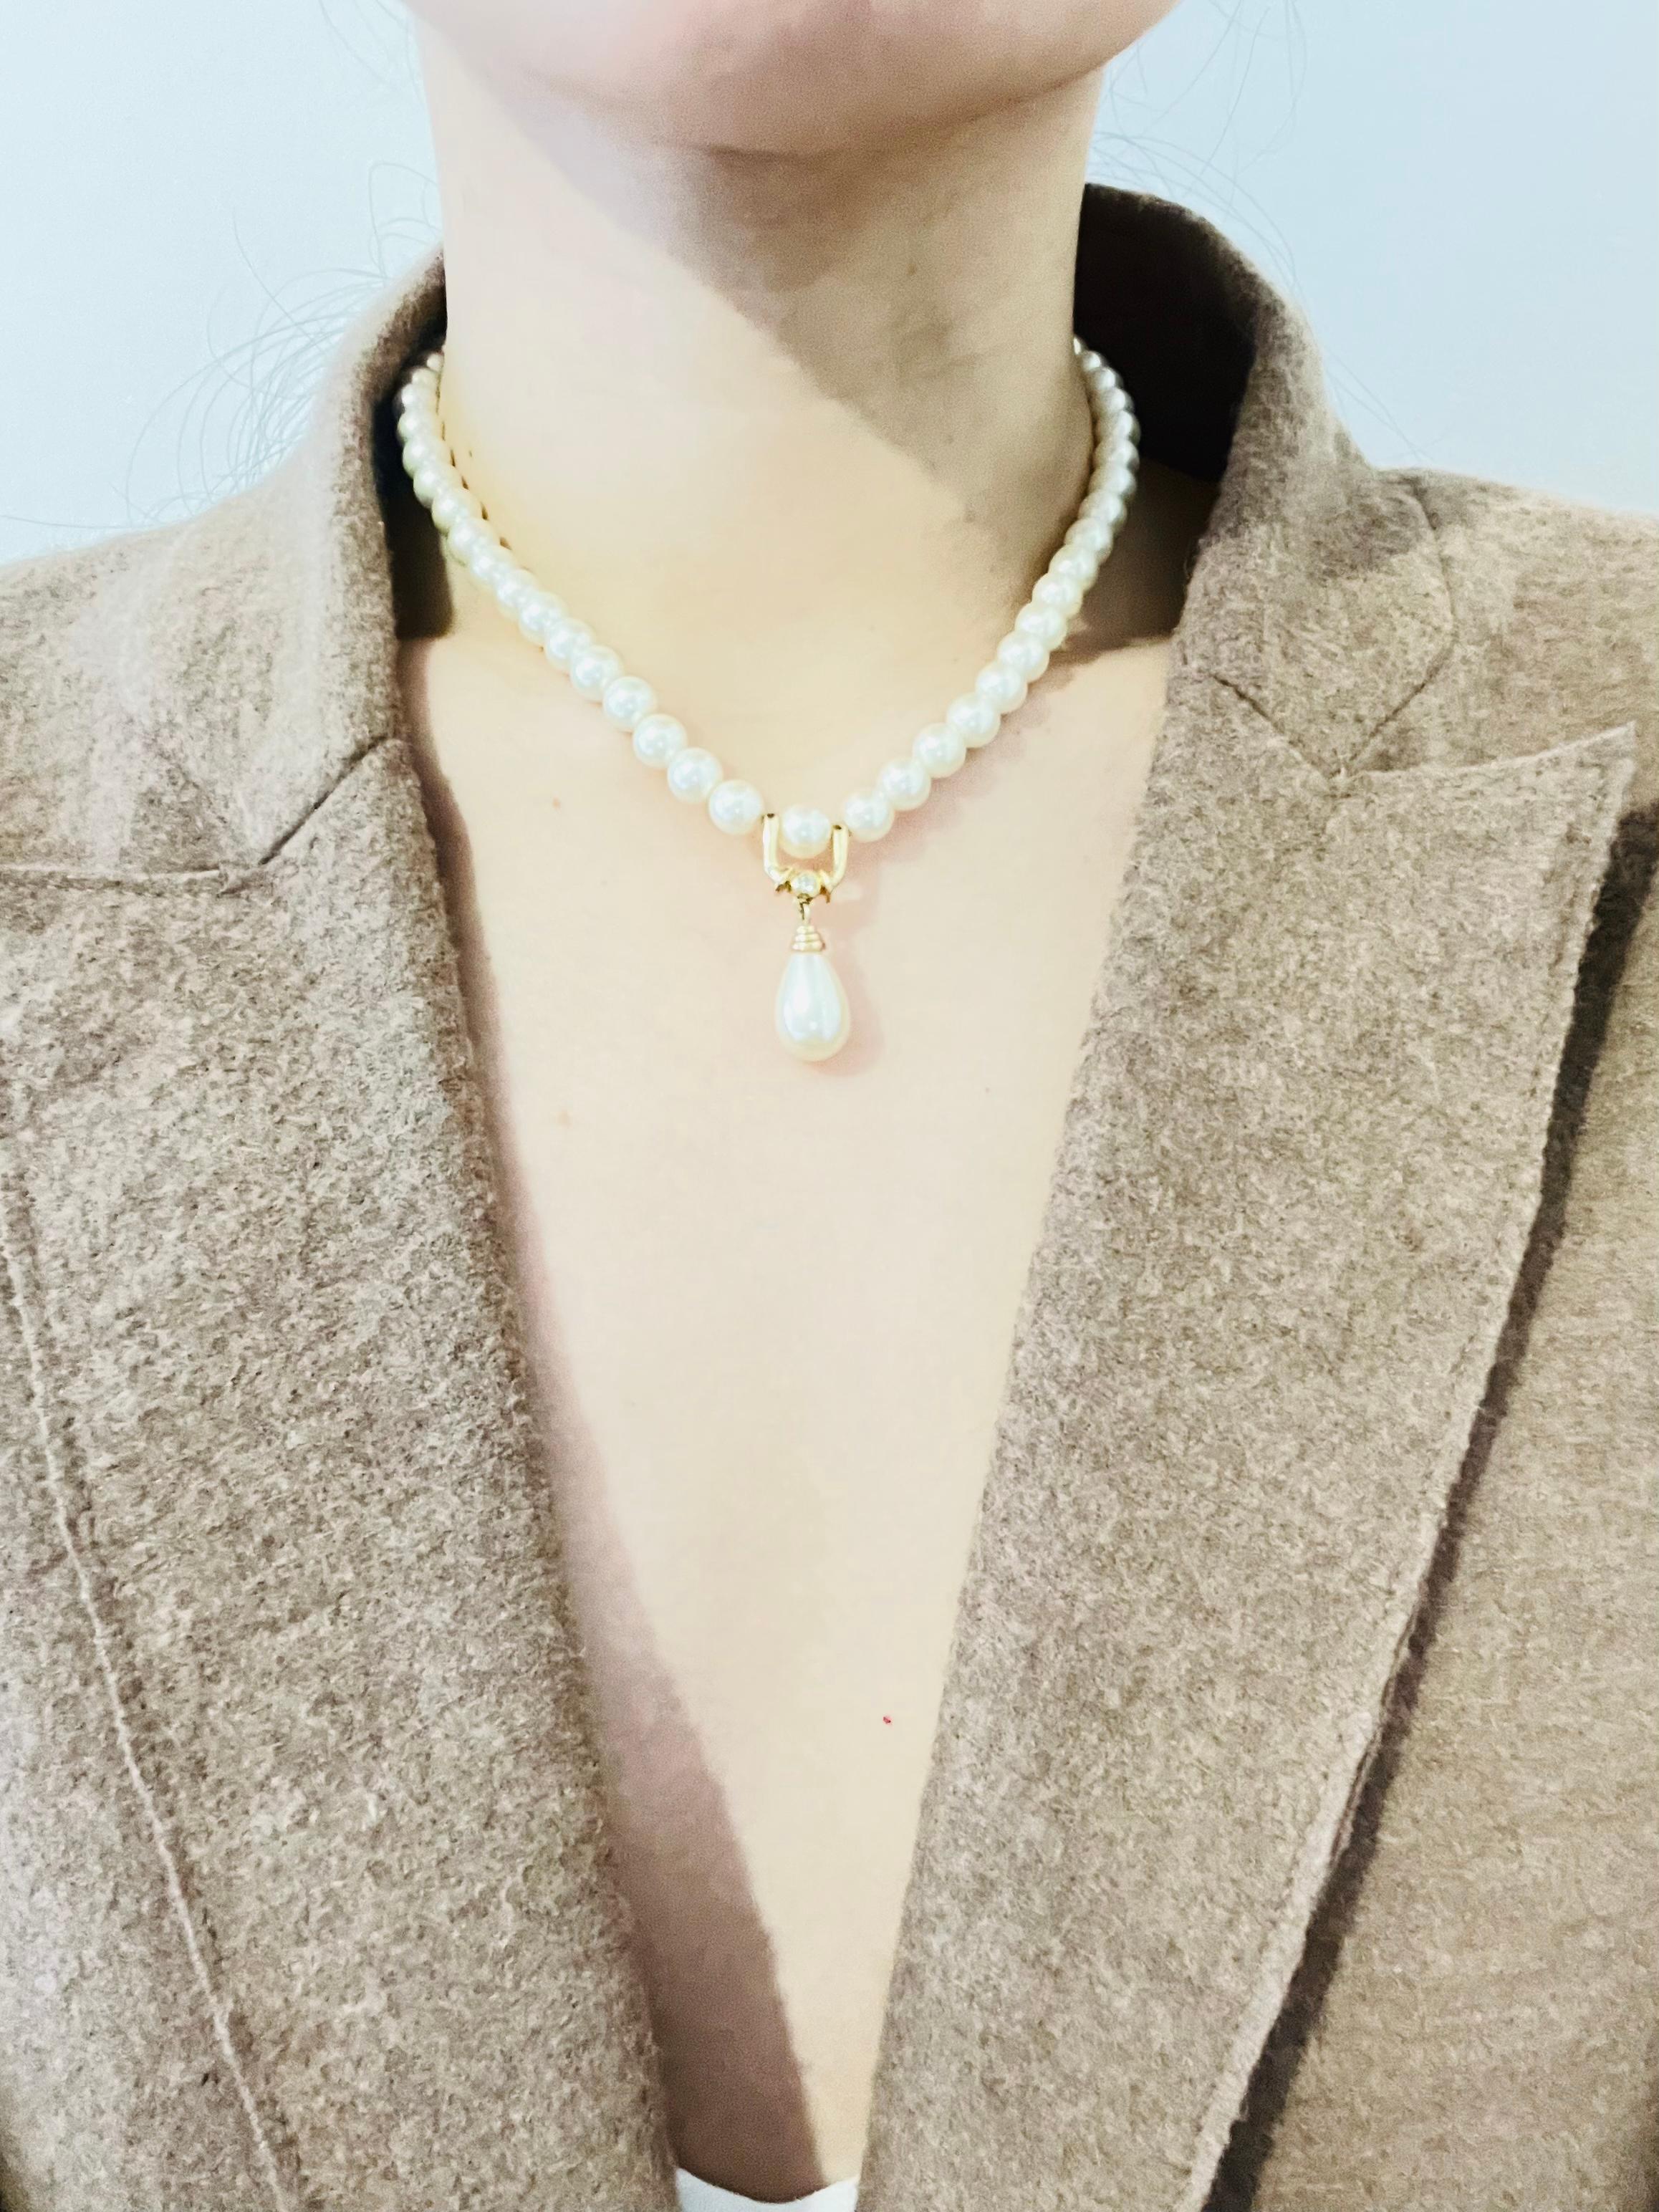 Christian Dior GROSSE 1960s White Pearls Water Drop Pendant Crystals Necklace For Sale 2